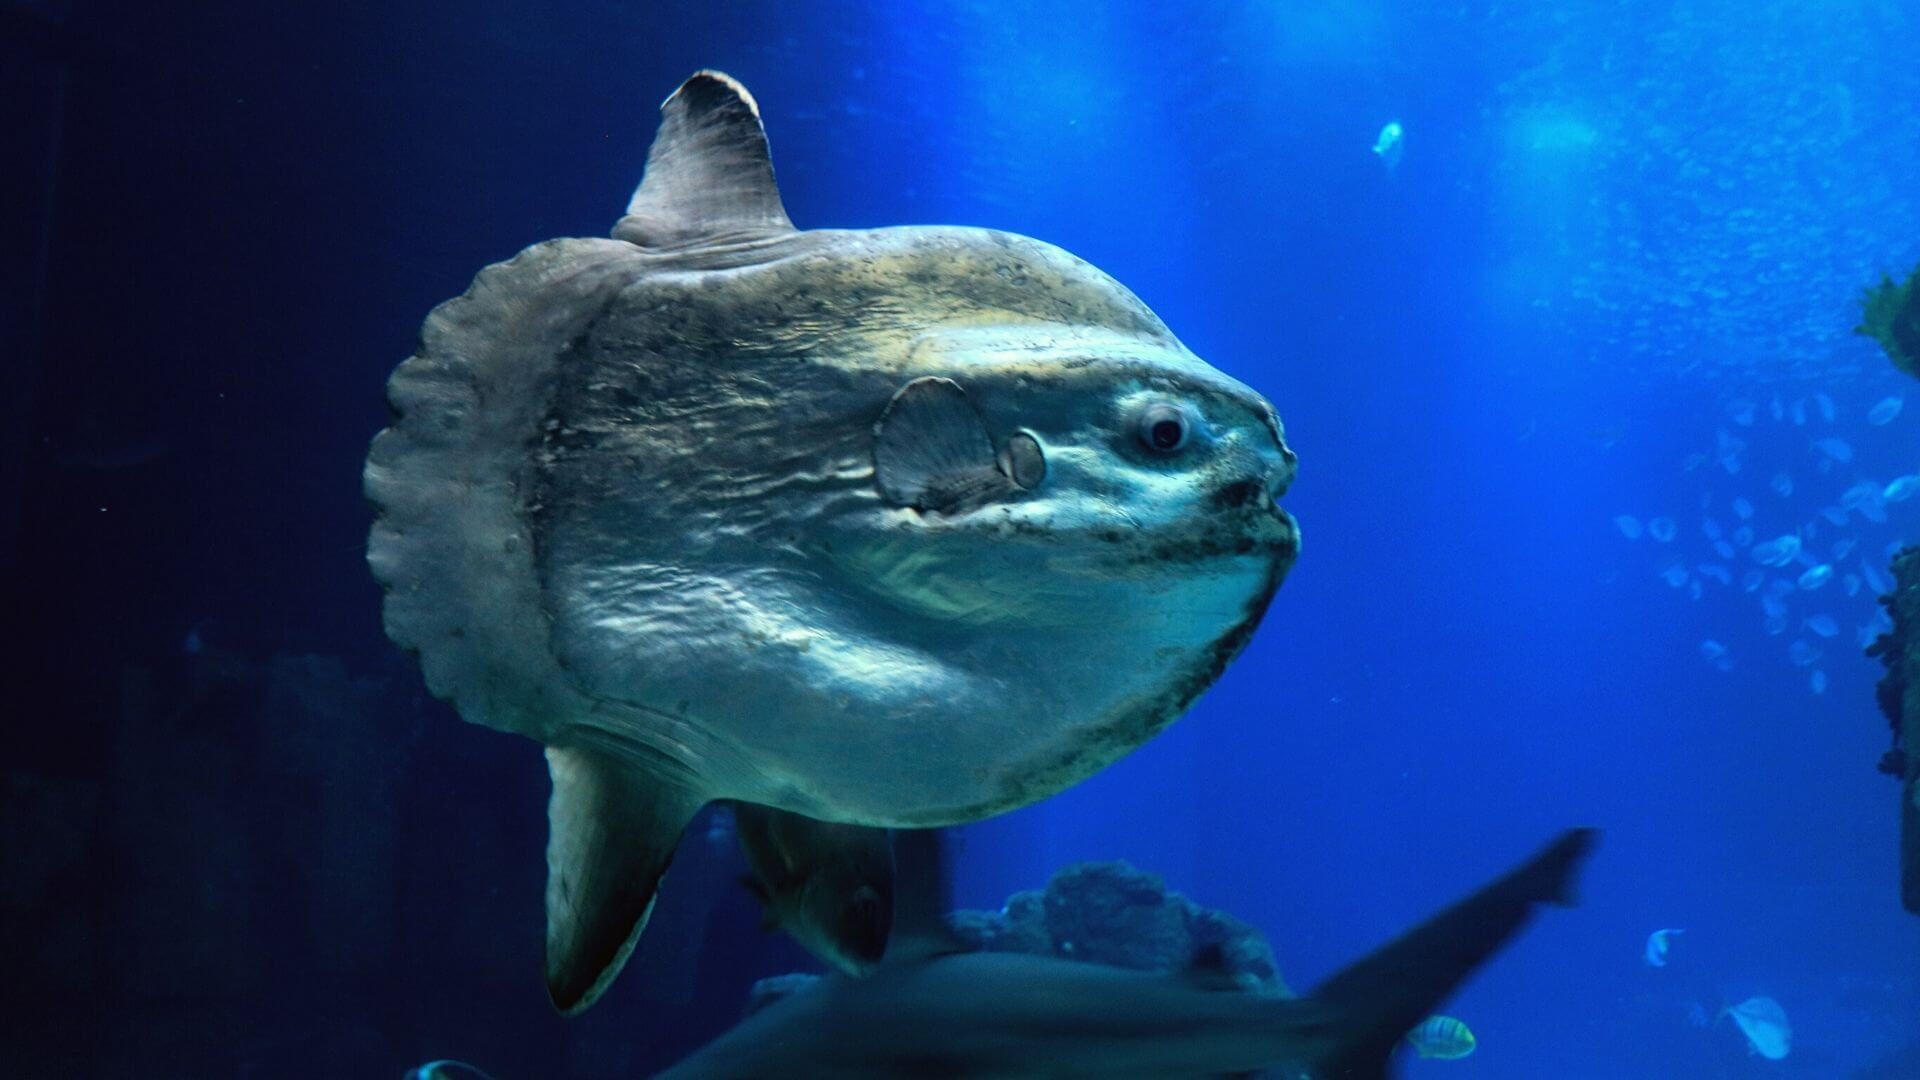 The largest bony fish in the world the Mola alexandrini previously known as Mola mola